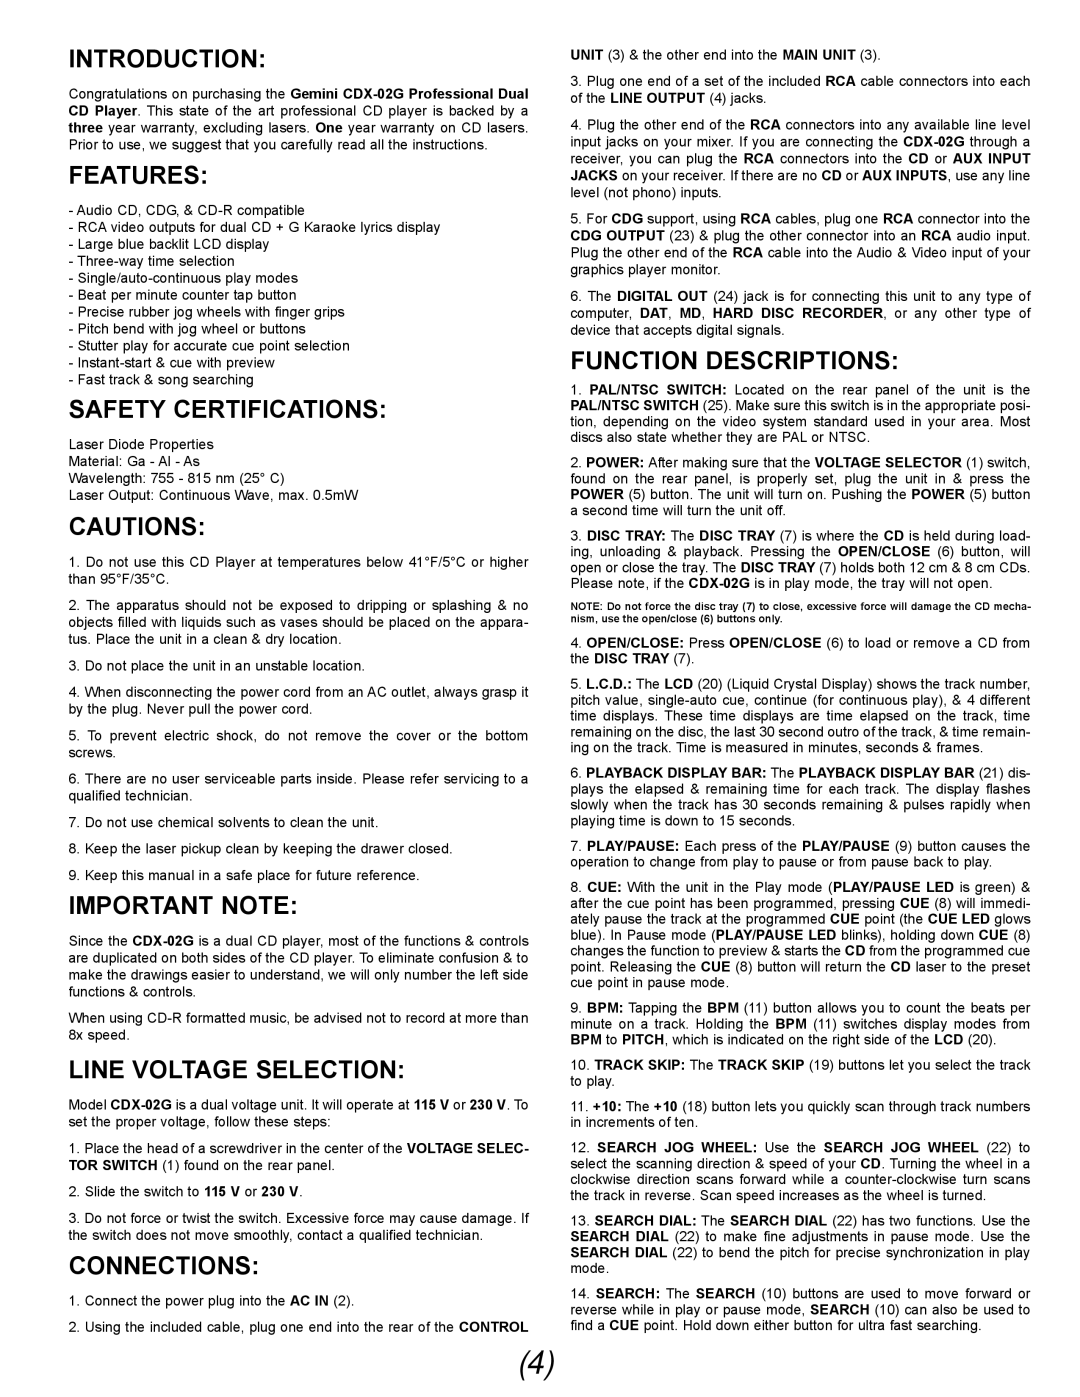 Gemini CDX-02G manual Introduction, Features, Safety Certifications, Cautions, Important Note, Line Voltage Selection 